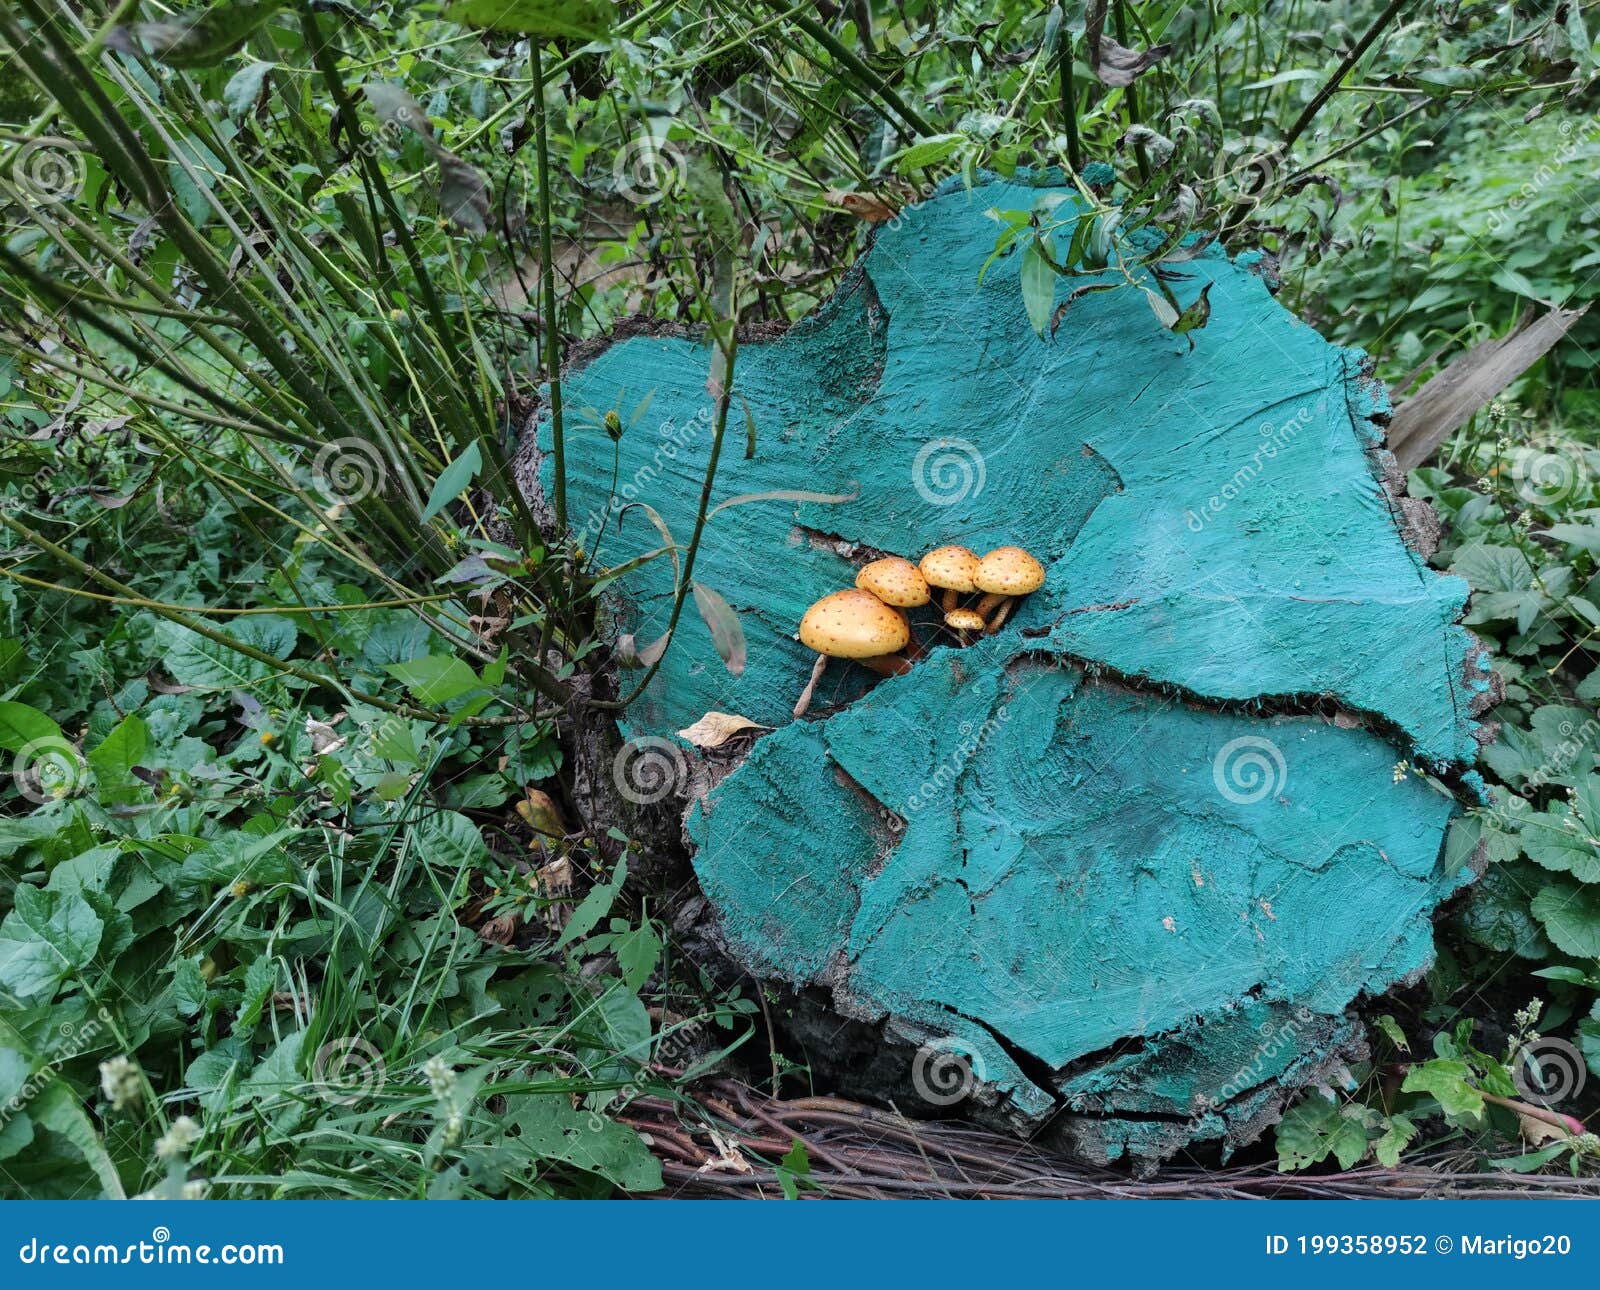 a group of mushrooms sprouted on a blue-colored stump .